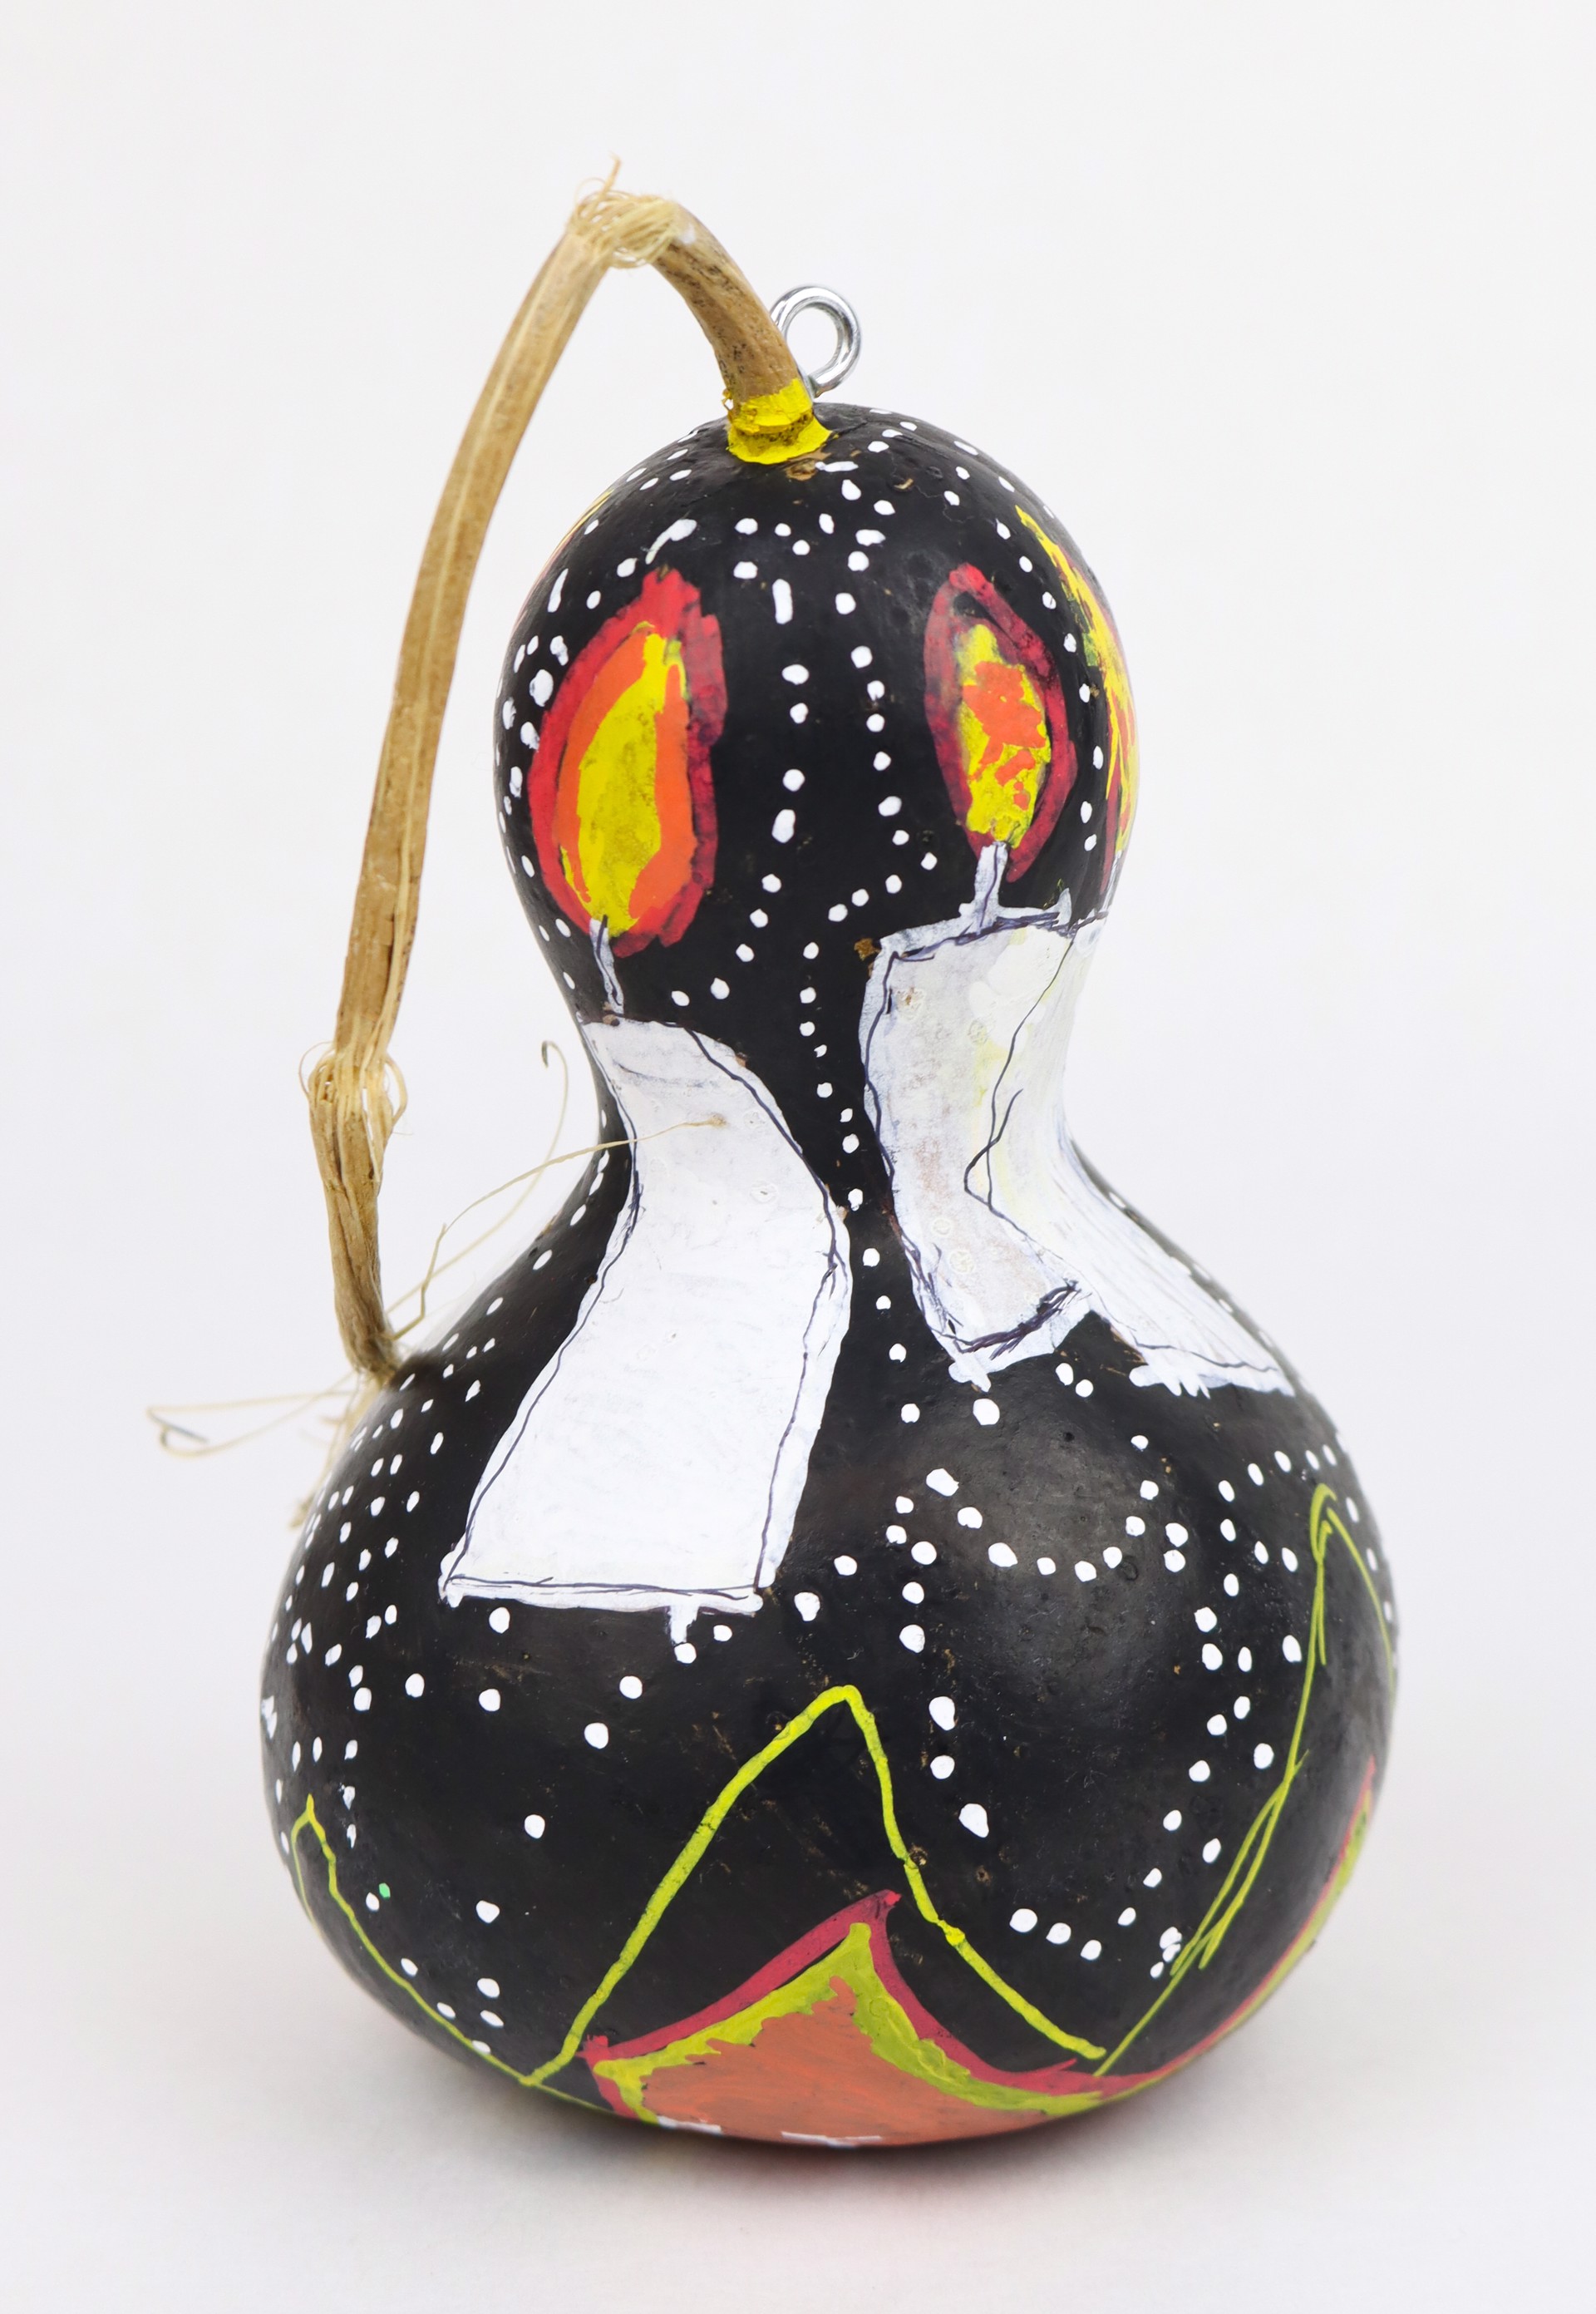 Candles (gourd ornament) by Charmaine Jones